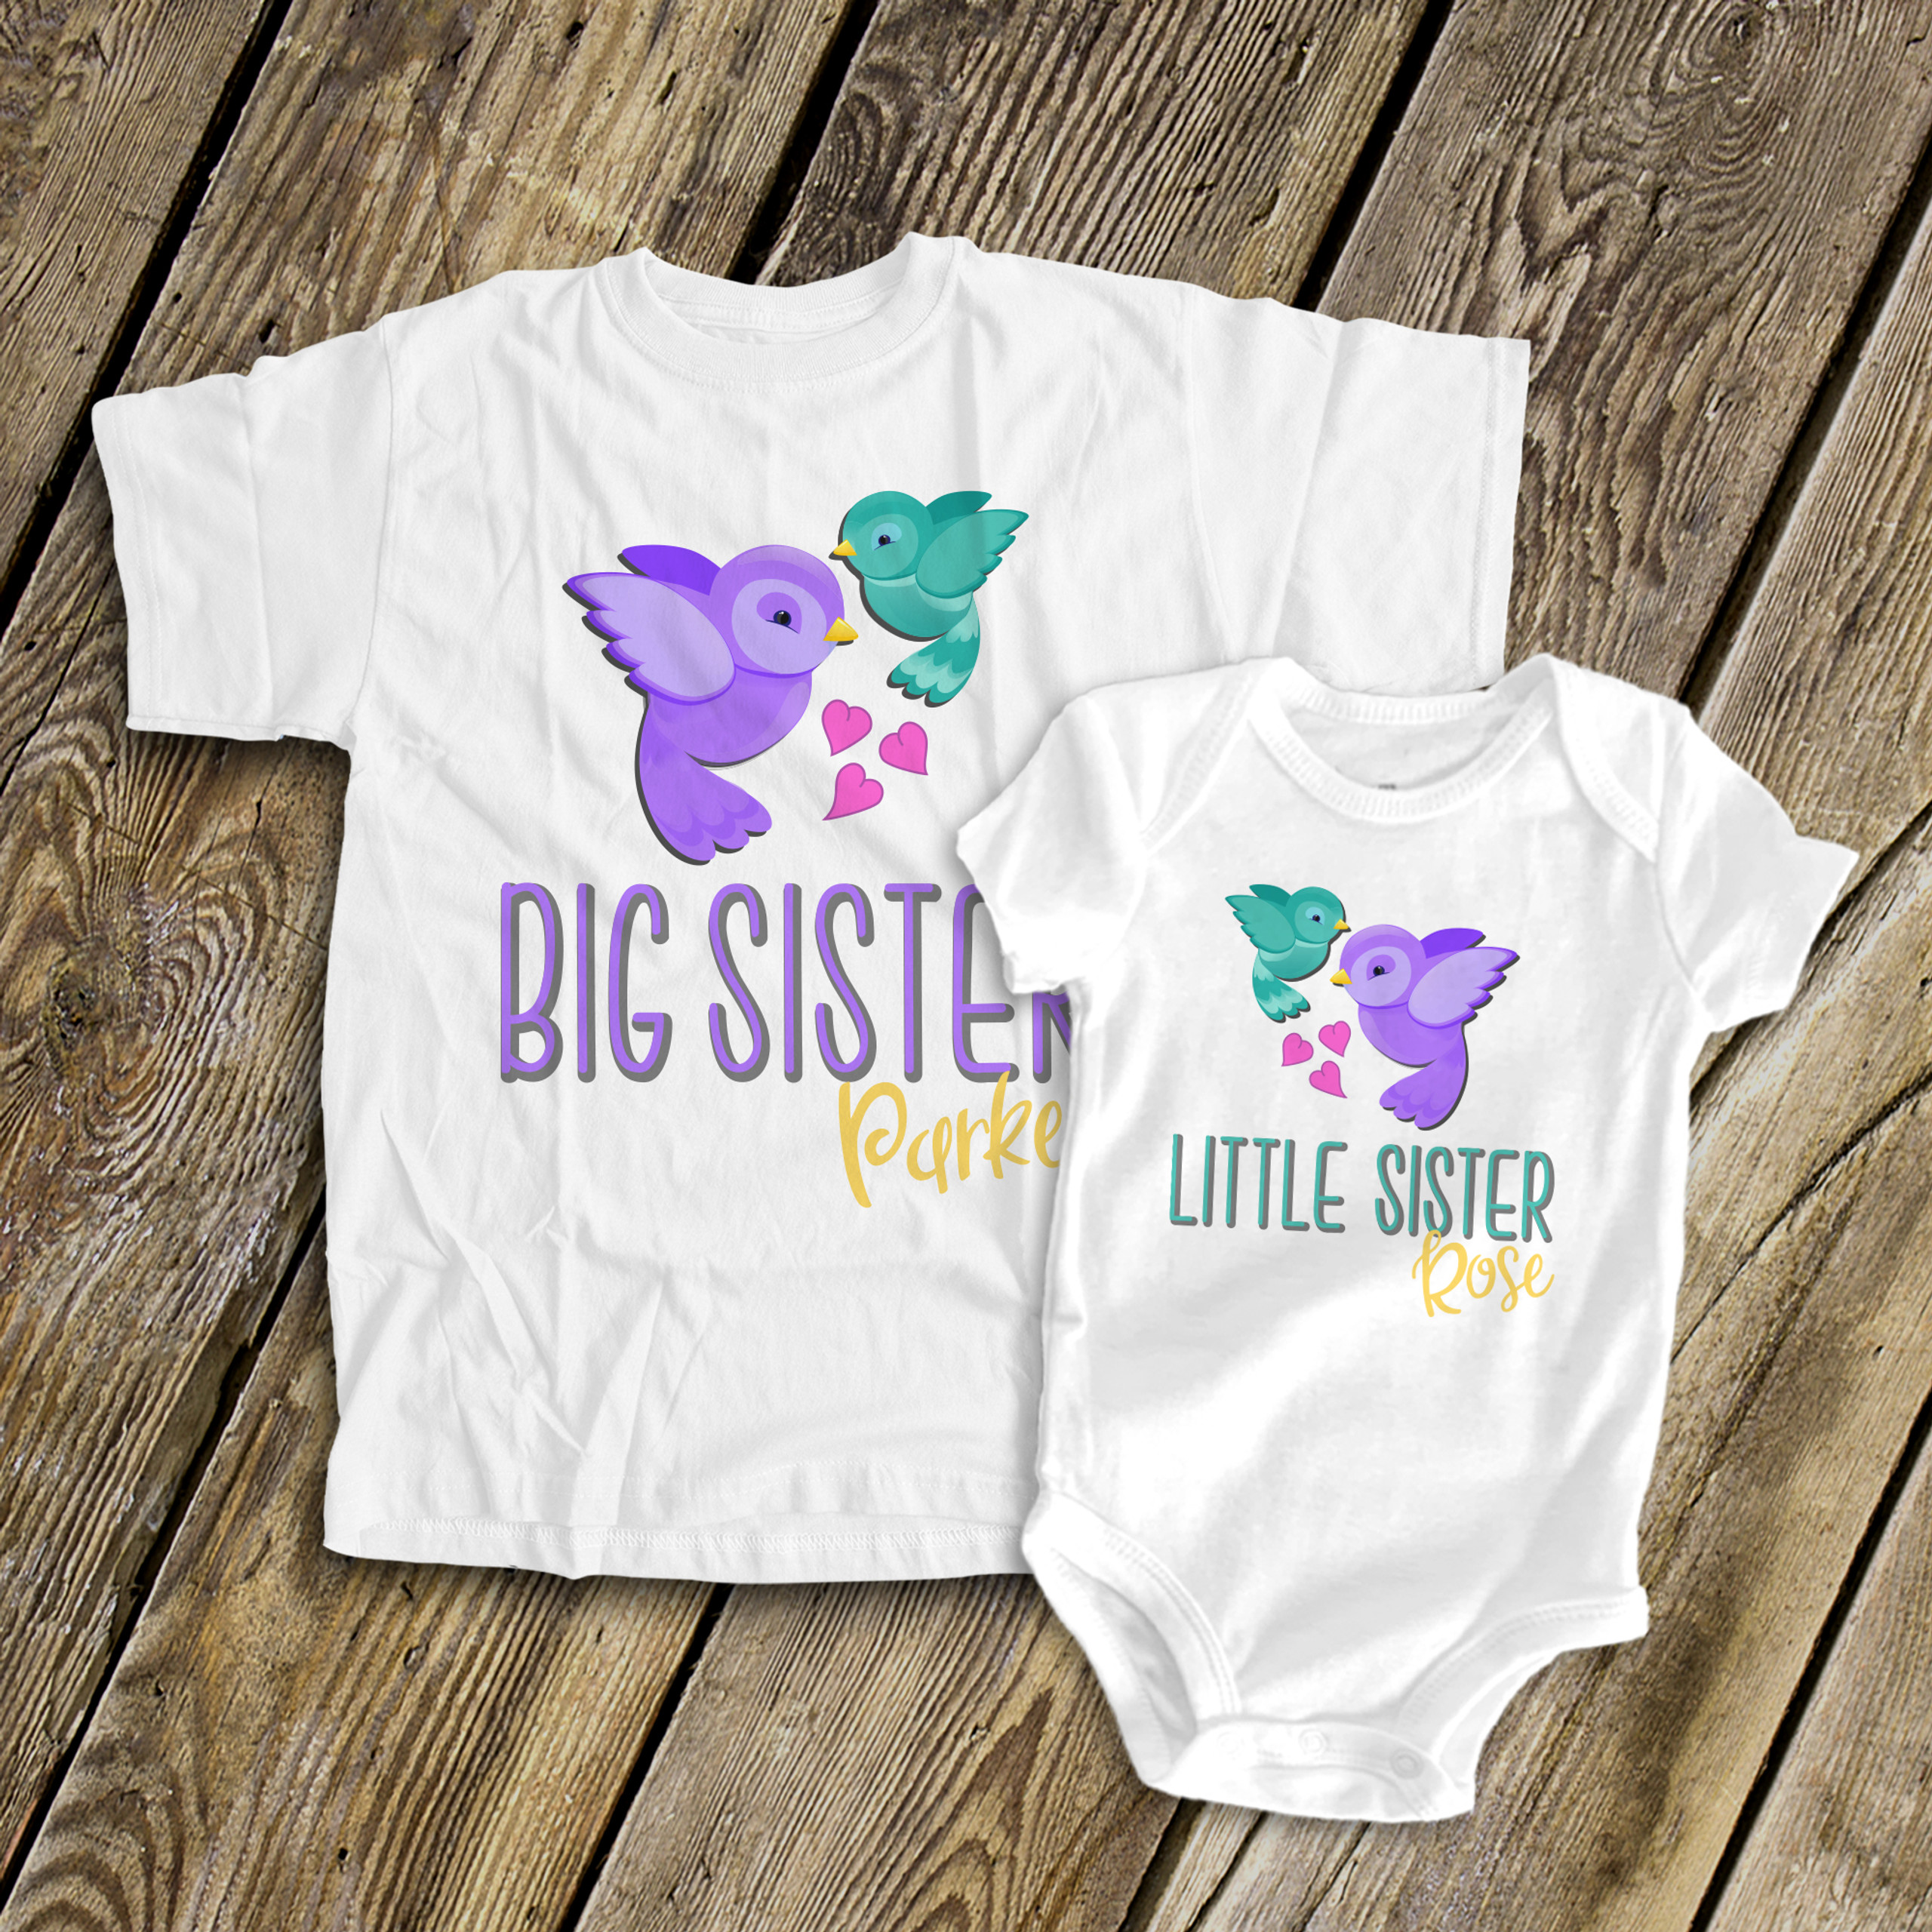 Personalized Sibling Shirt Sets - Zoey's Attic